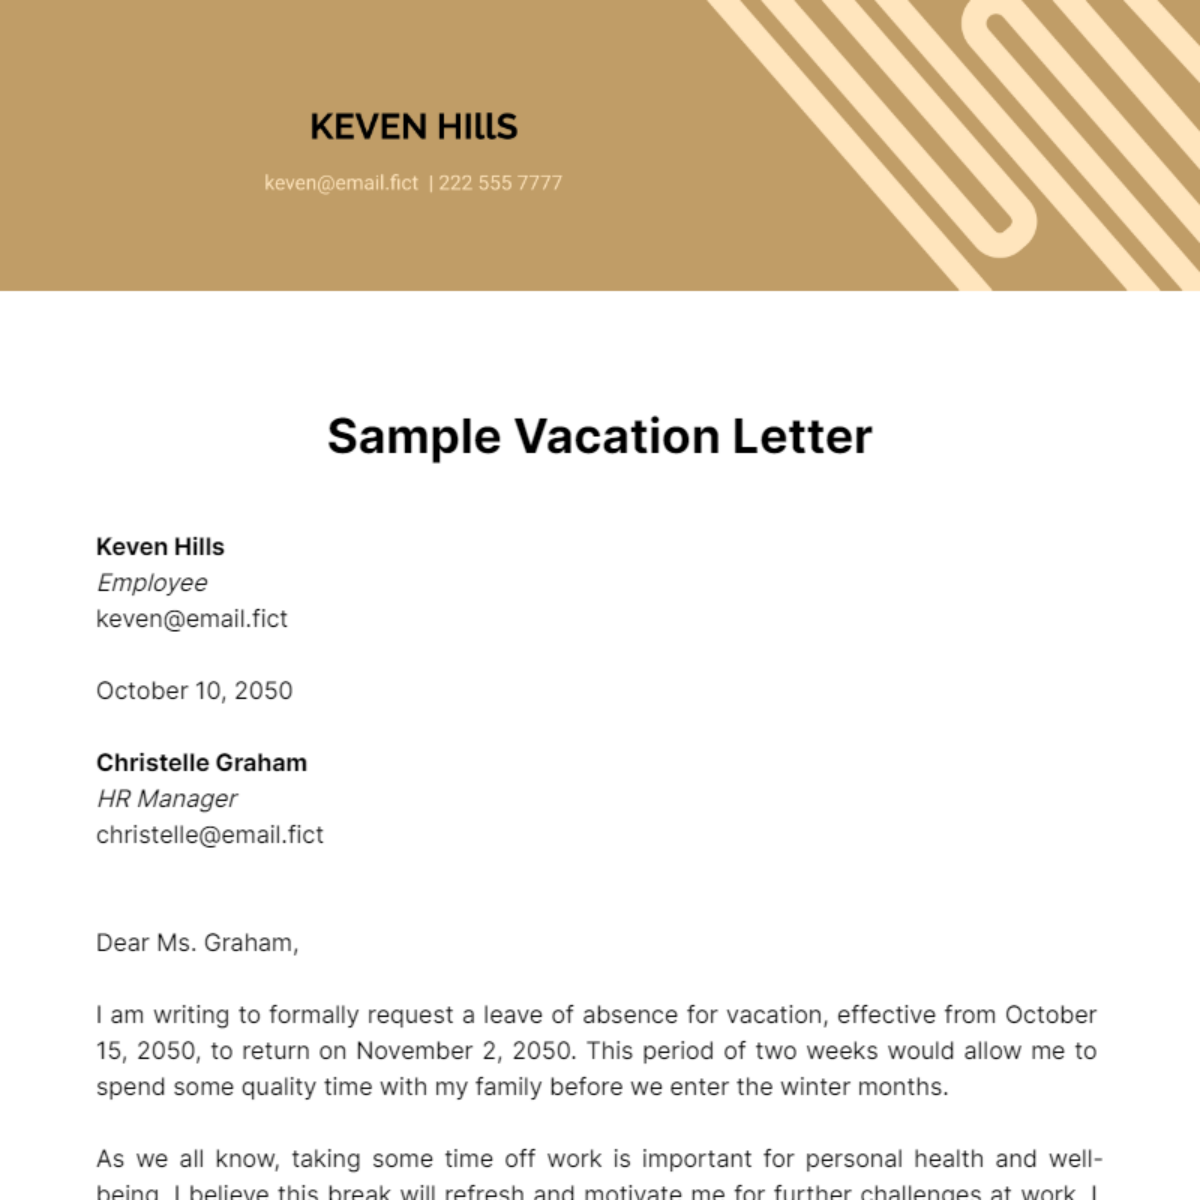 Sample Vacation Letter Template